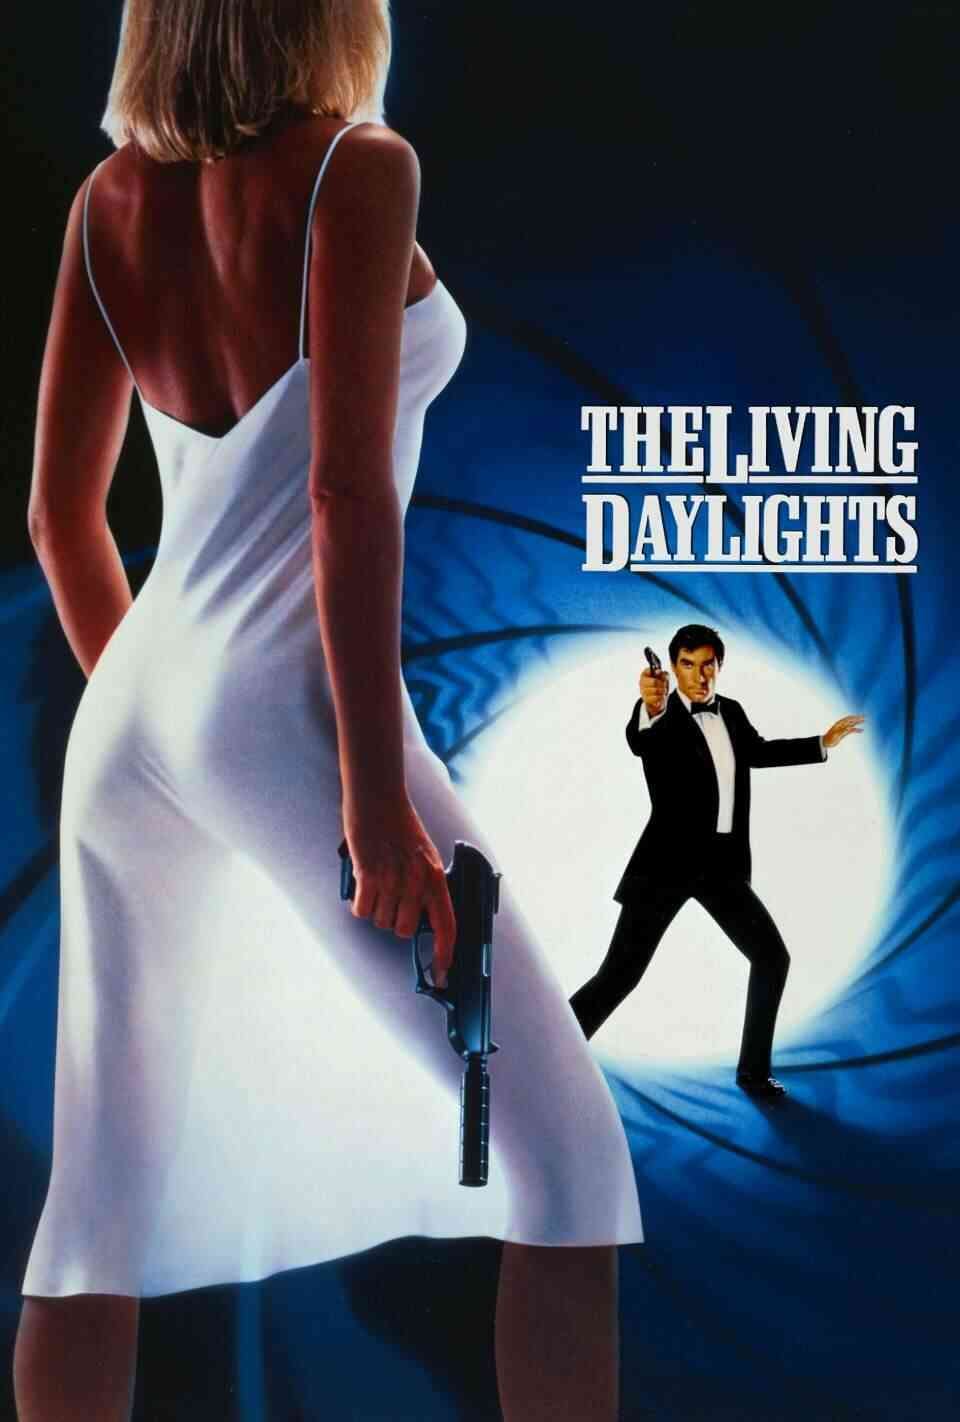 Read The Living Daylights screenplay (poster)